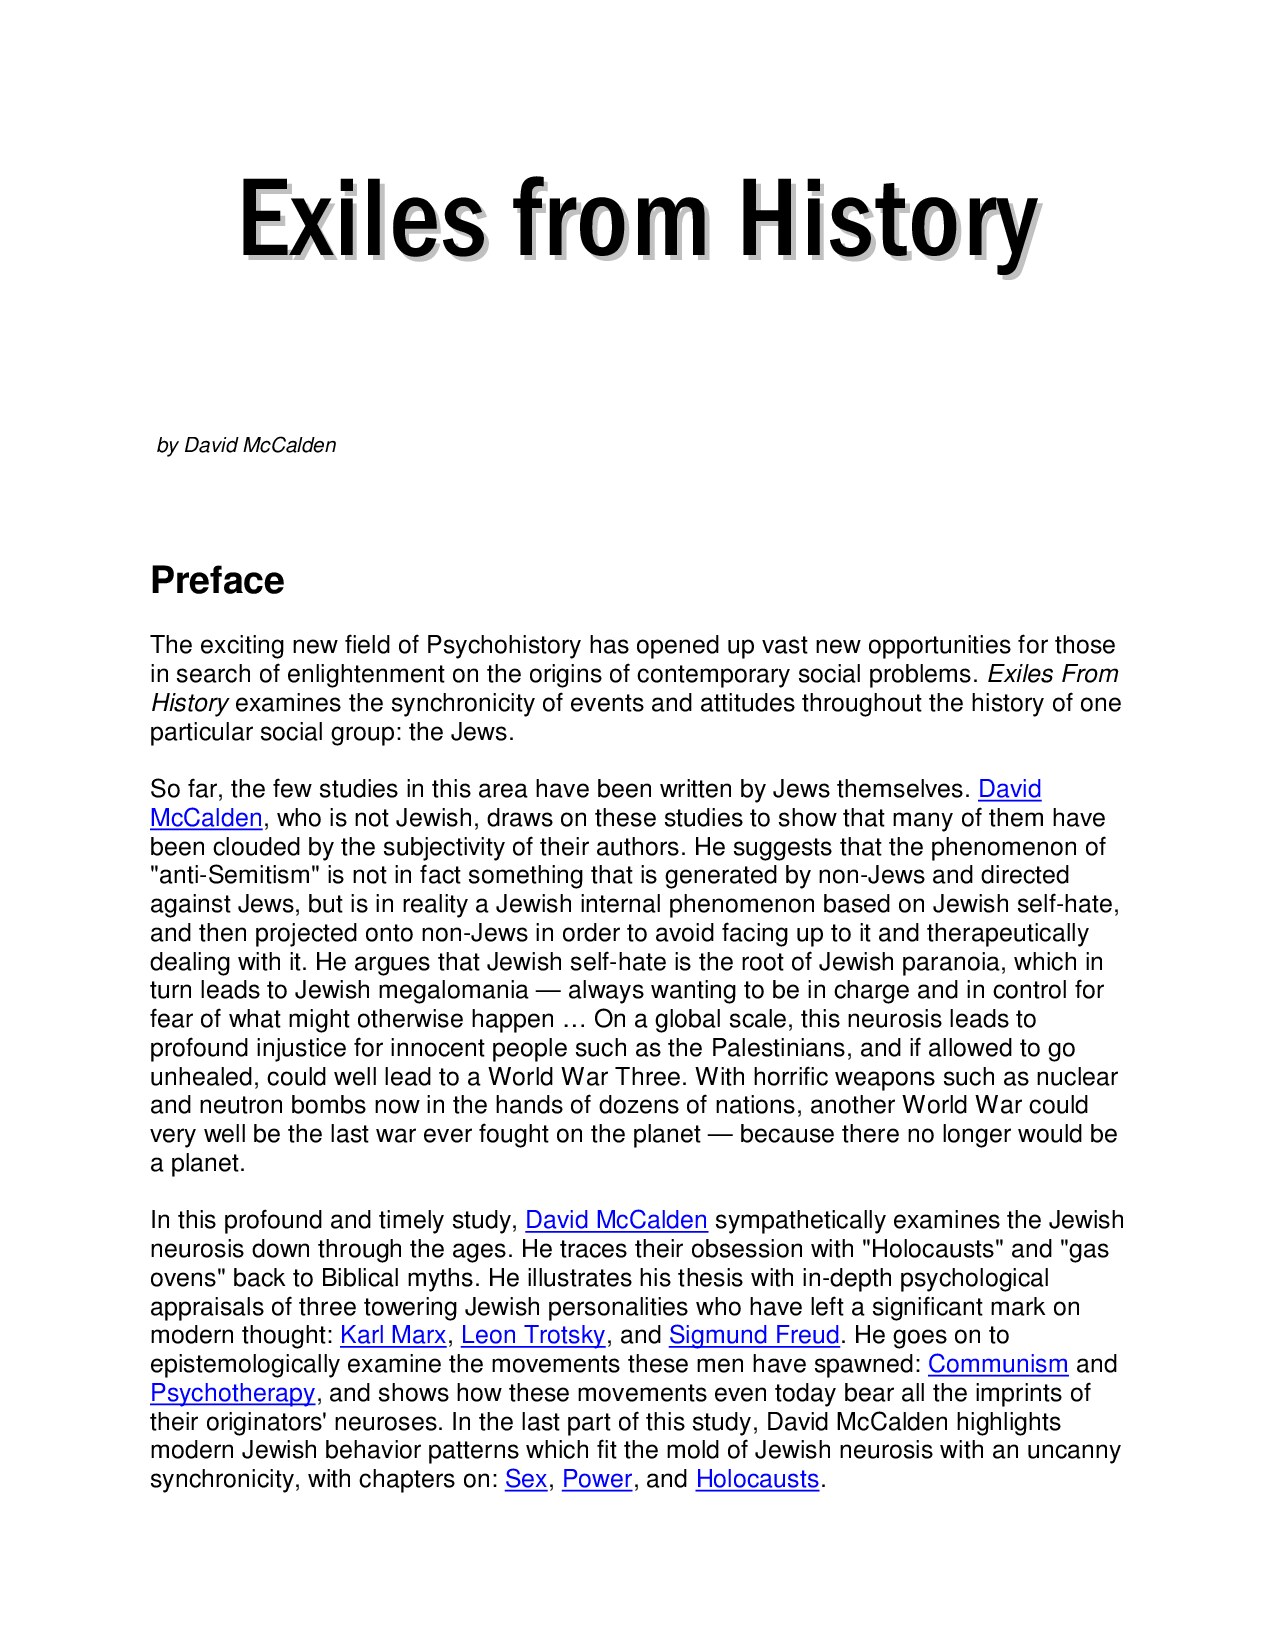 Microsoft Word - Exiles from History.doc